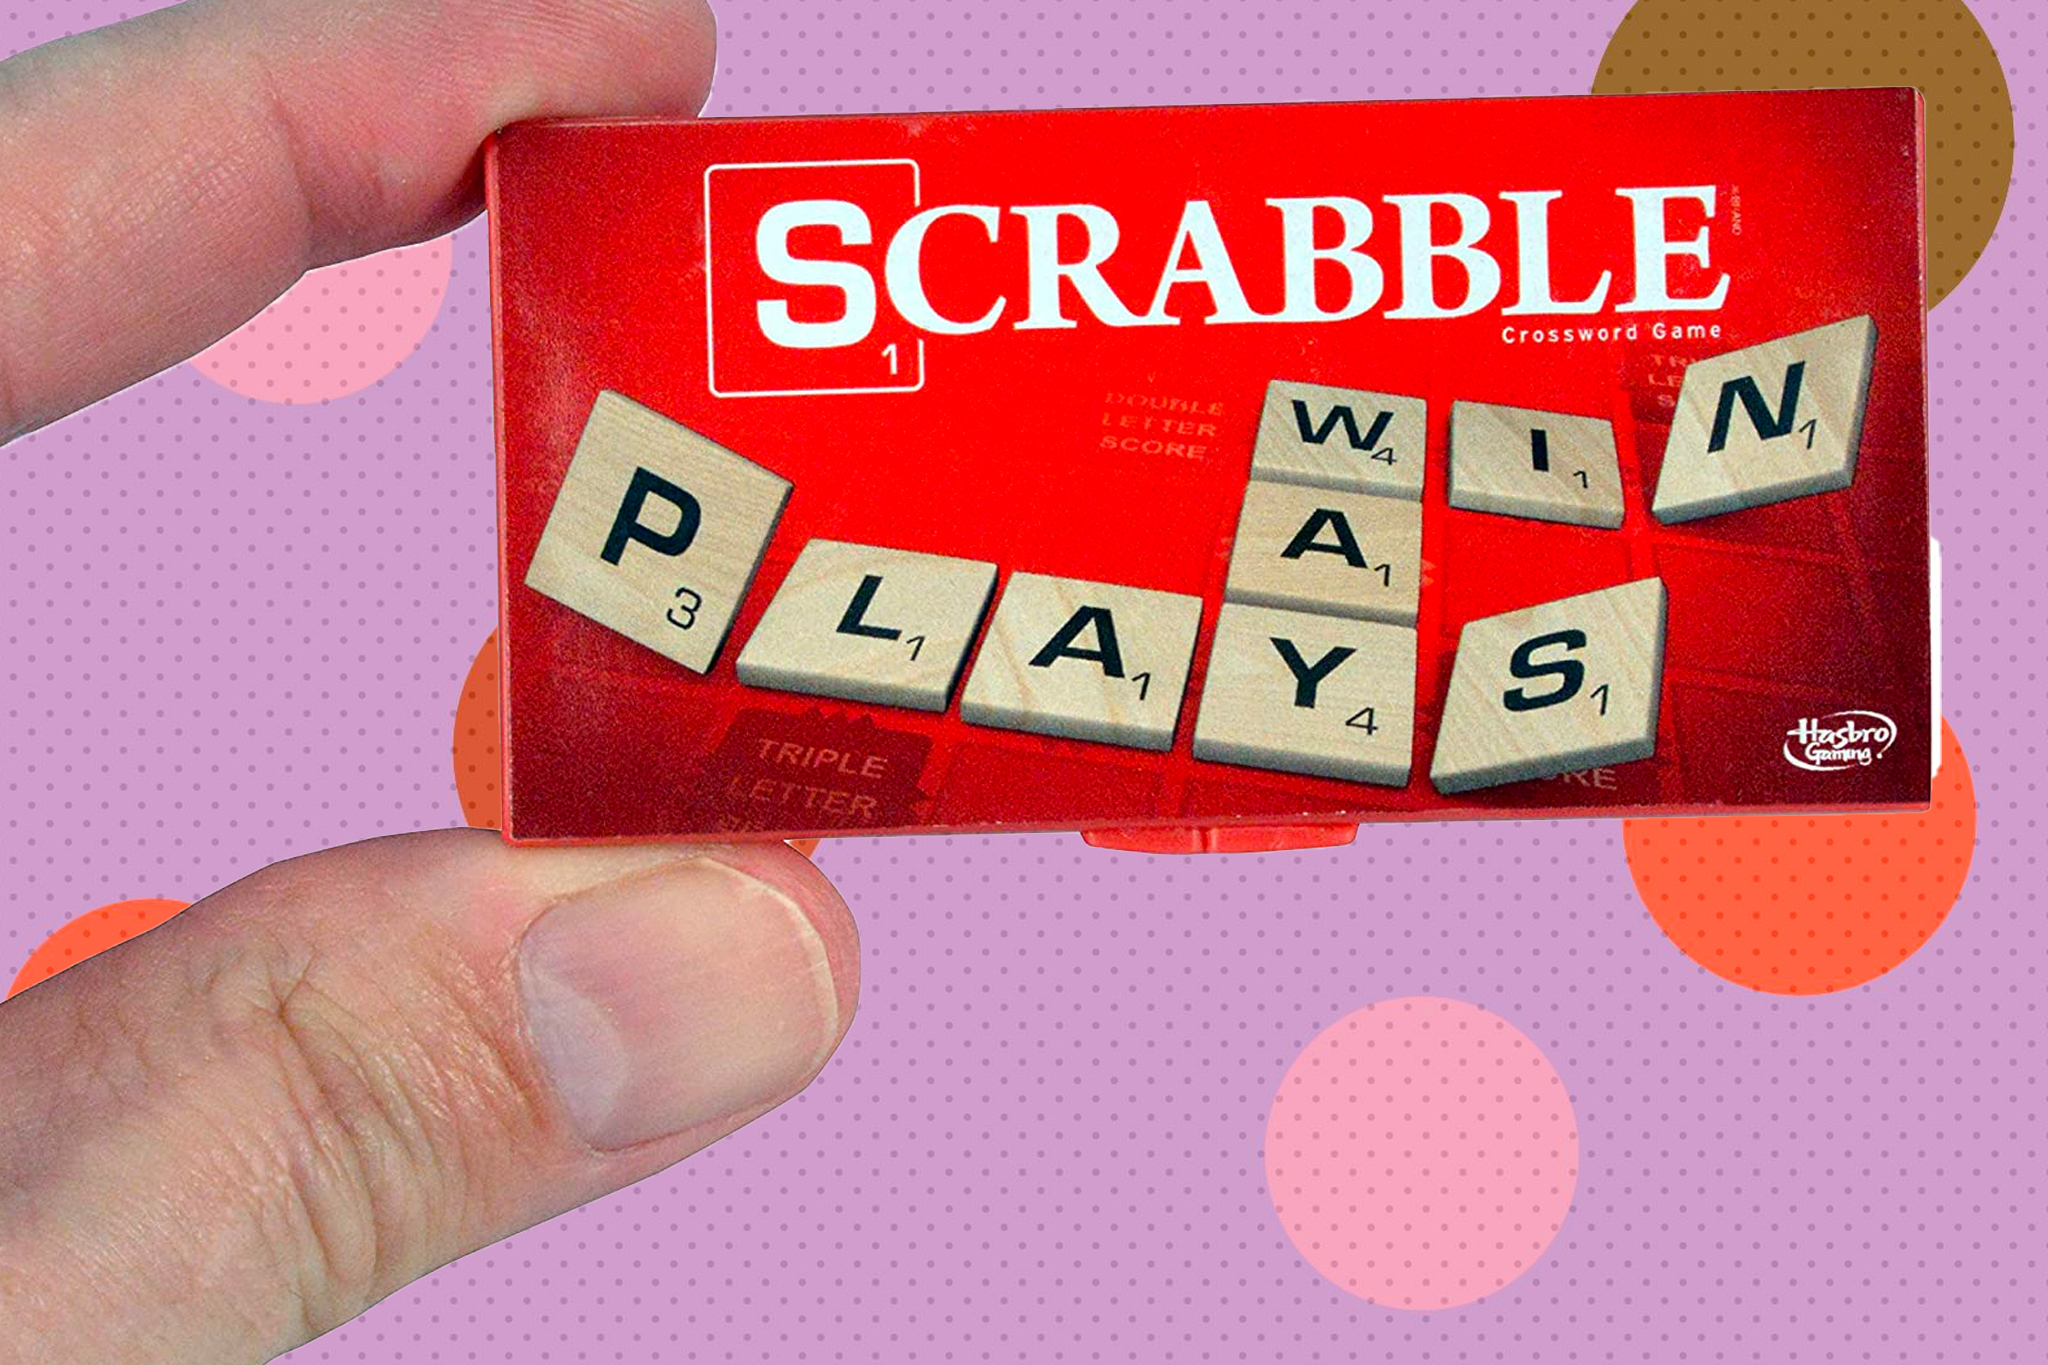 Details about   Worlds Smallest Scrabble A Fully Playable Game! 